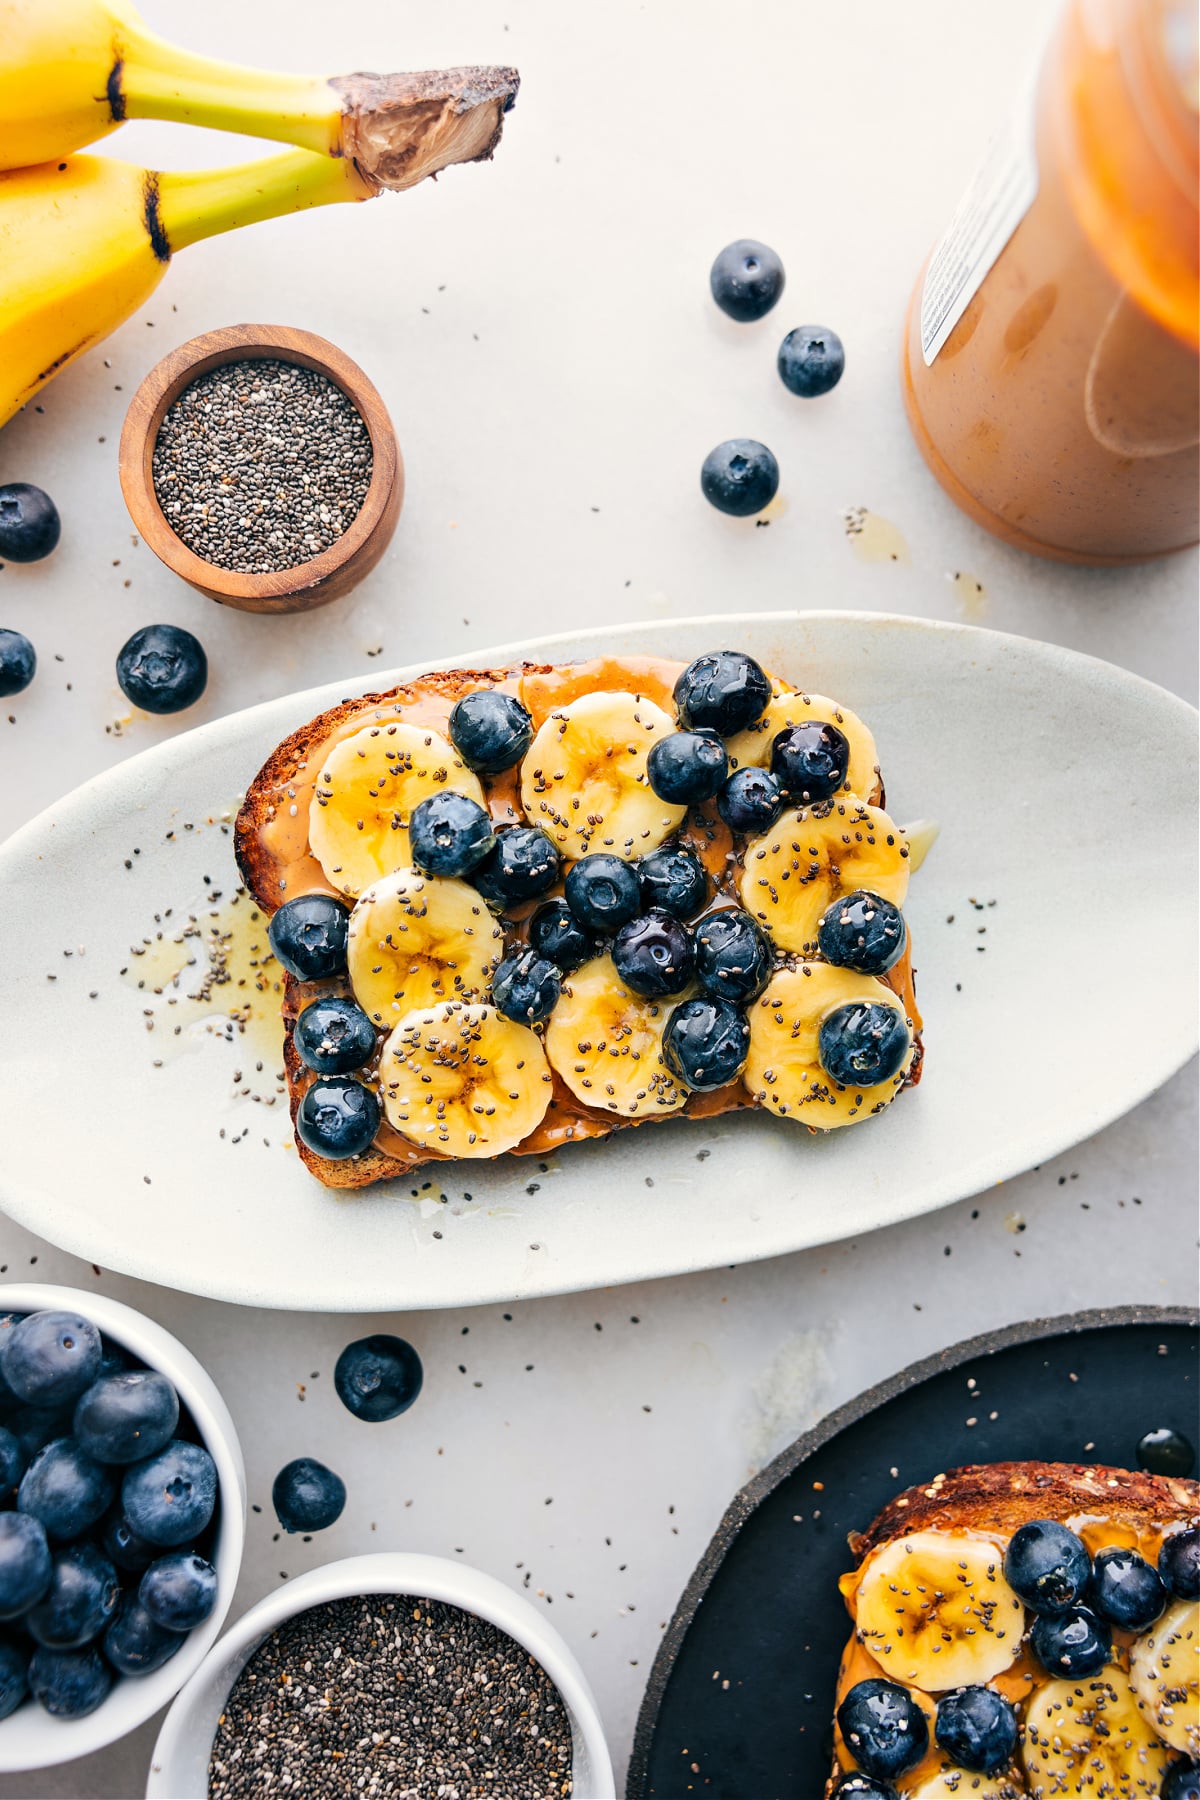 Breakfast toast on a platter with all the fun toppings like bananas, blueberries, chia seeds, and honey.